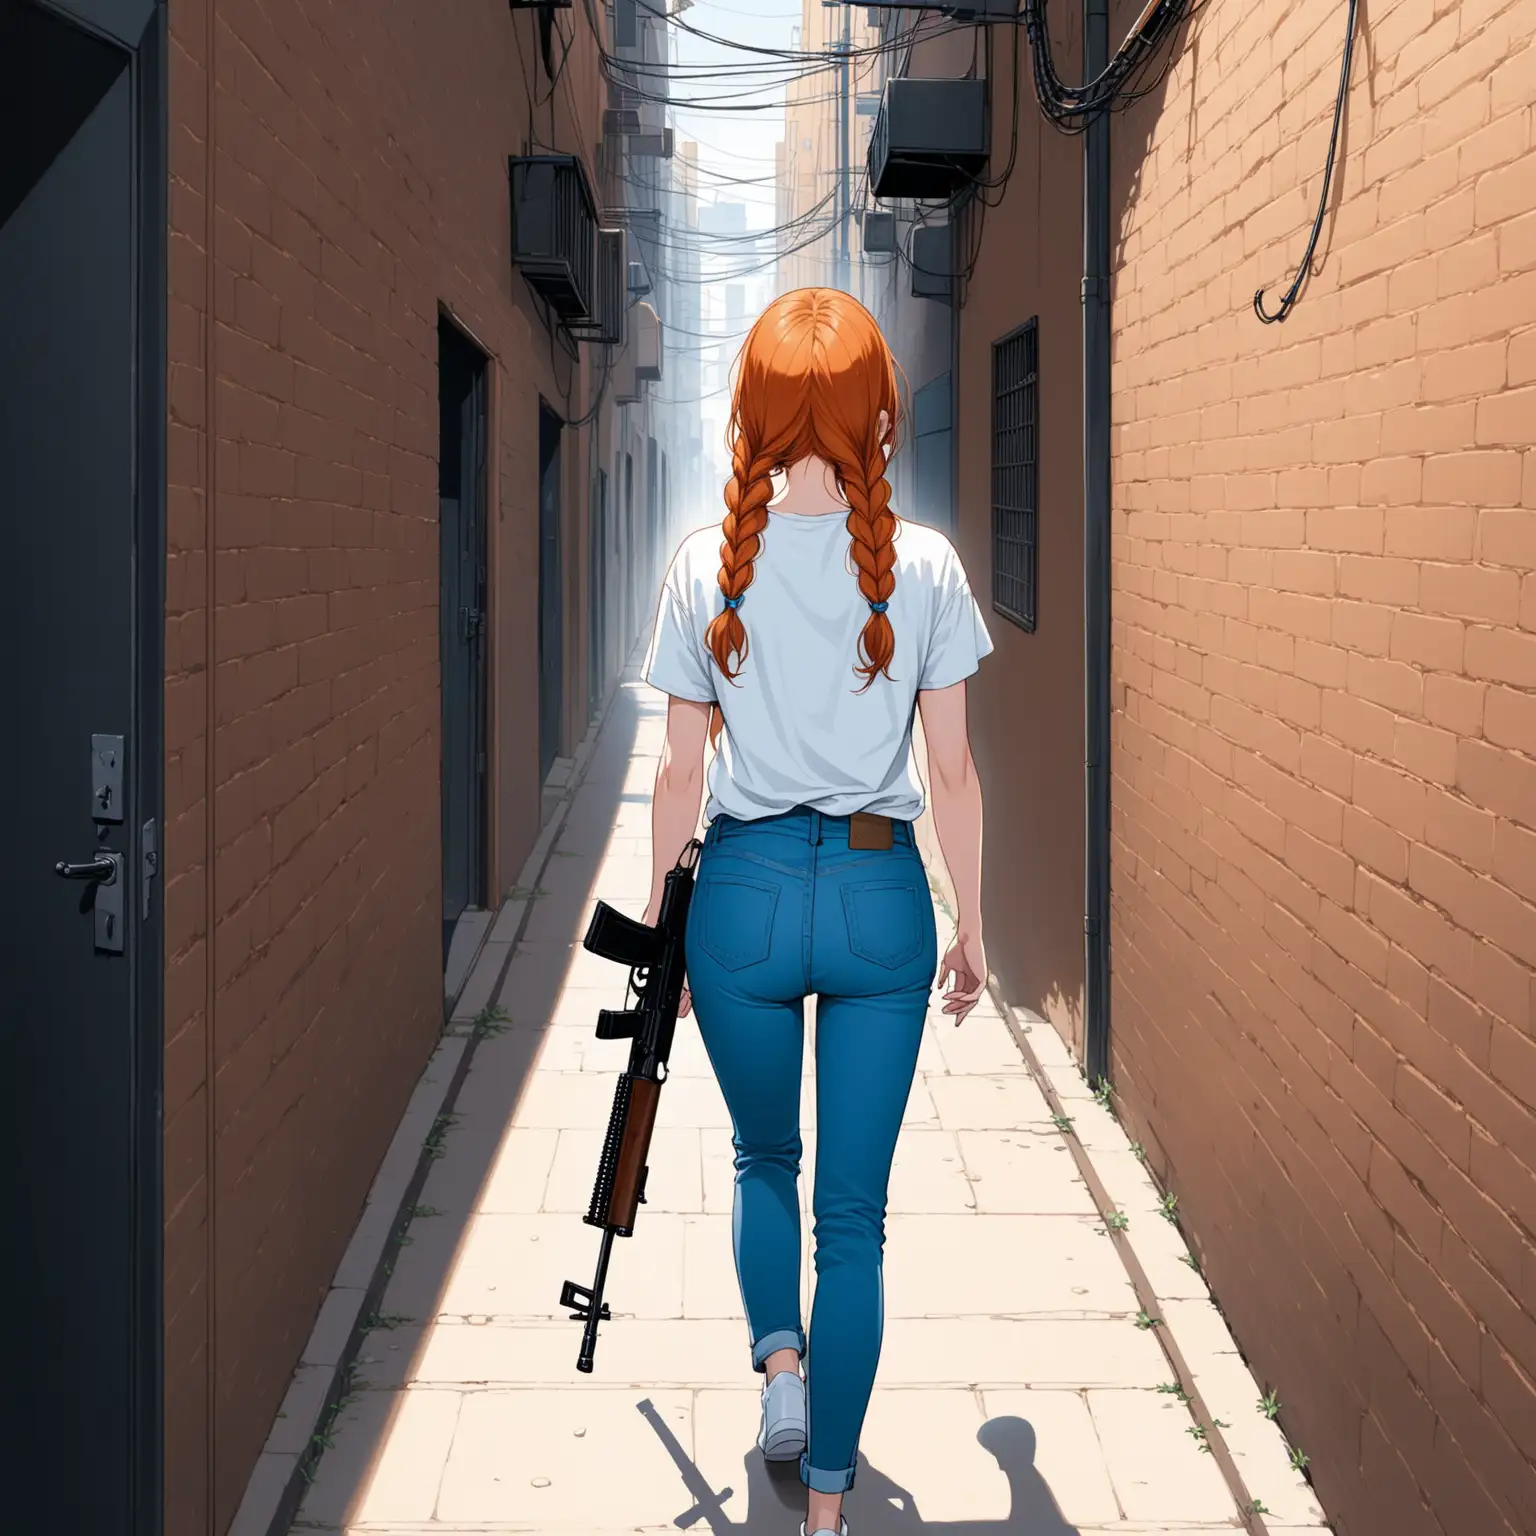 Confident Redhead Woman with Rifle Walking in Urban Alleyway